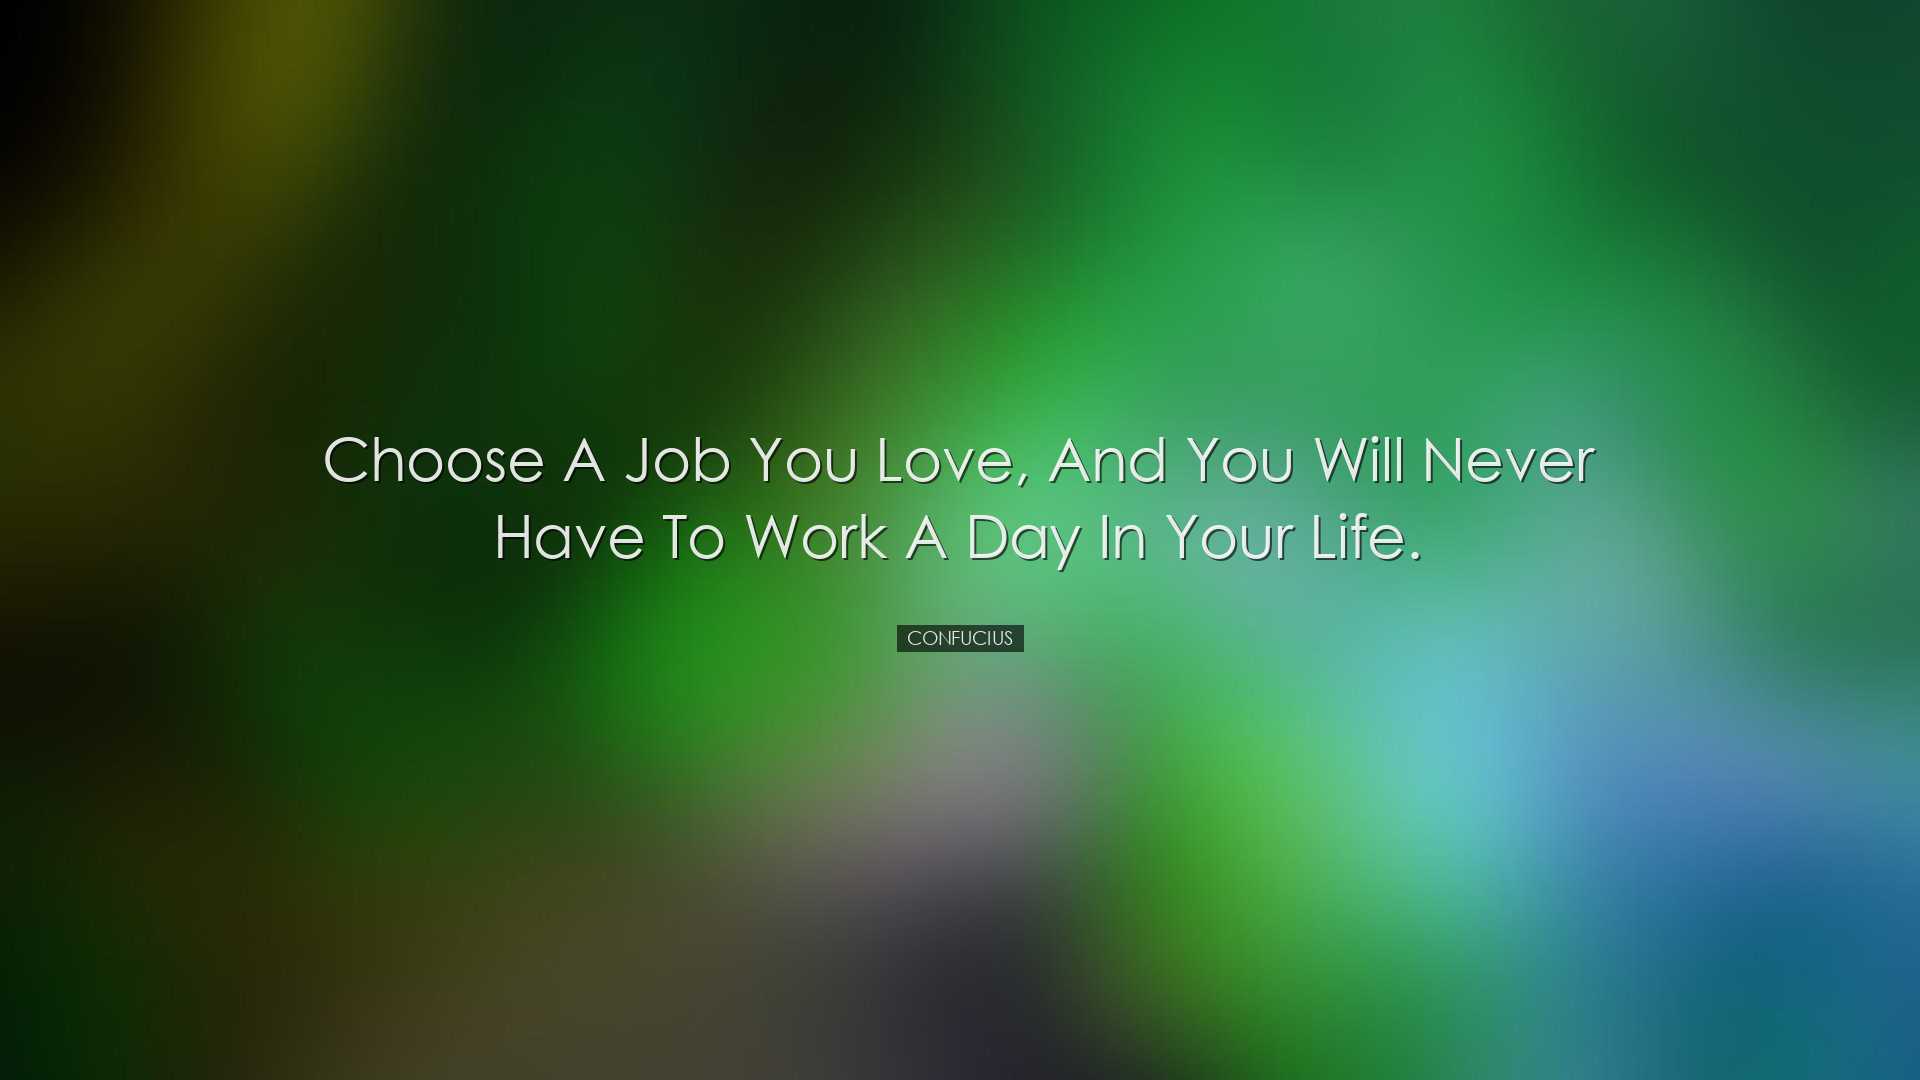 Choose a job you love, and you will never have to work a day in yo